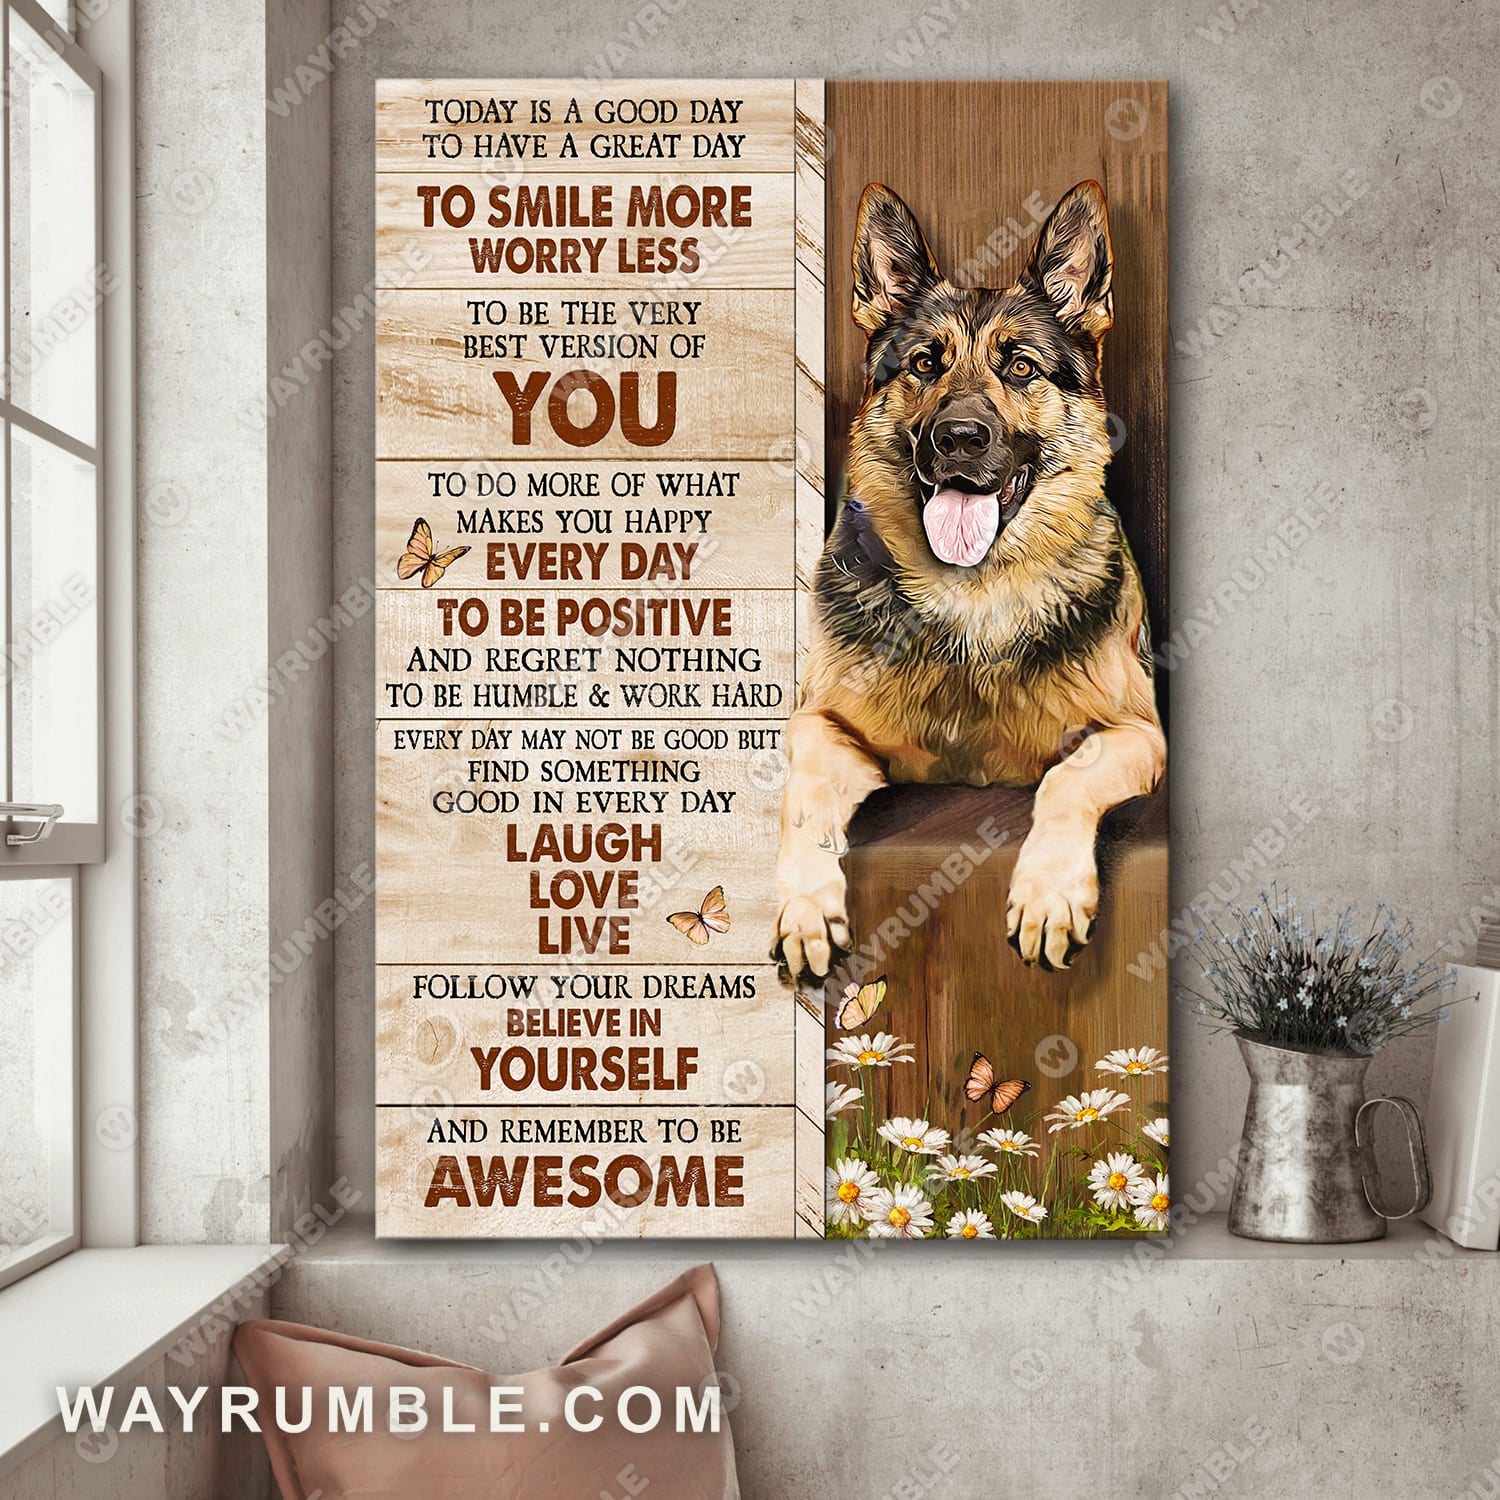 German Shepherd dog, Daisy painting, Believe in yourself and remember to be awesome - German shepherd Portrait Canvas Prints, Wall Art